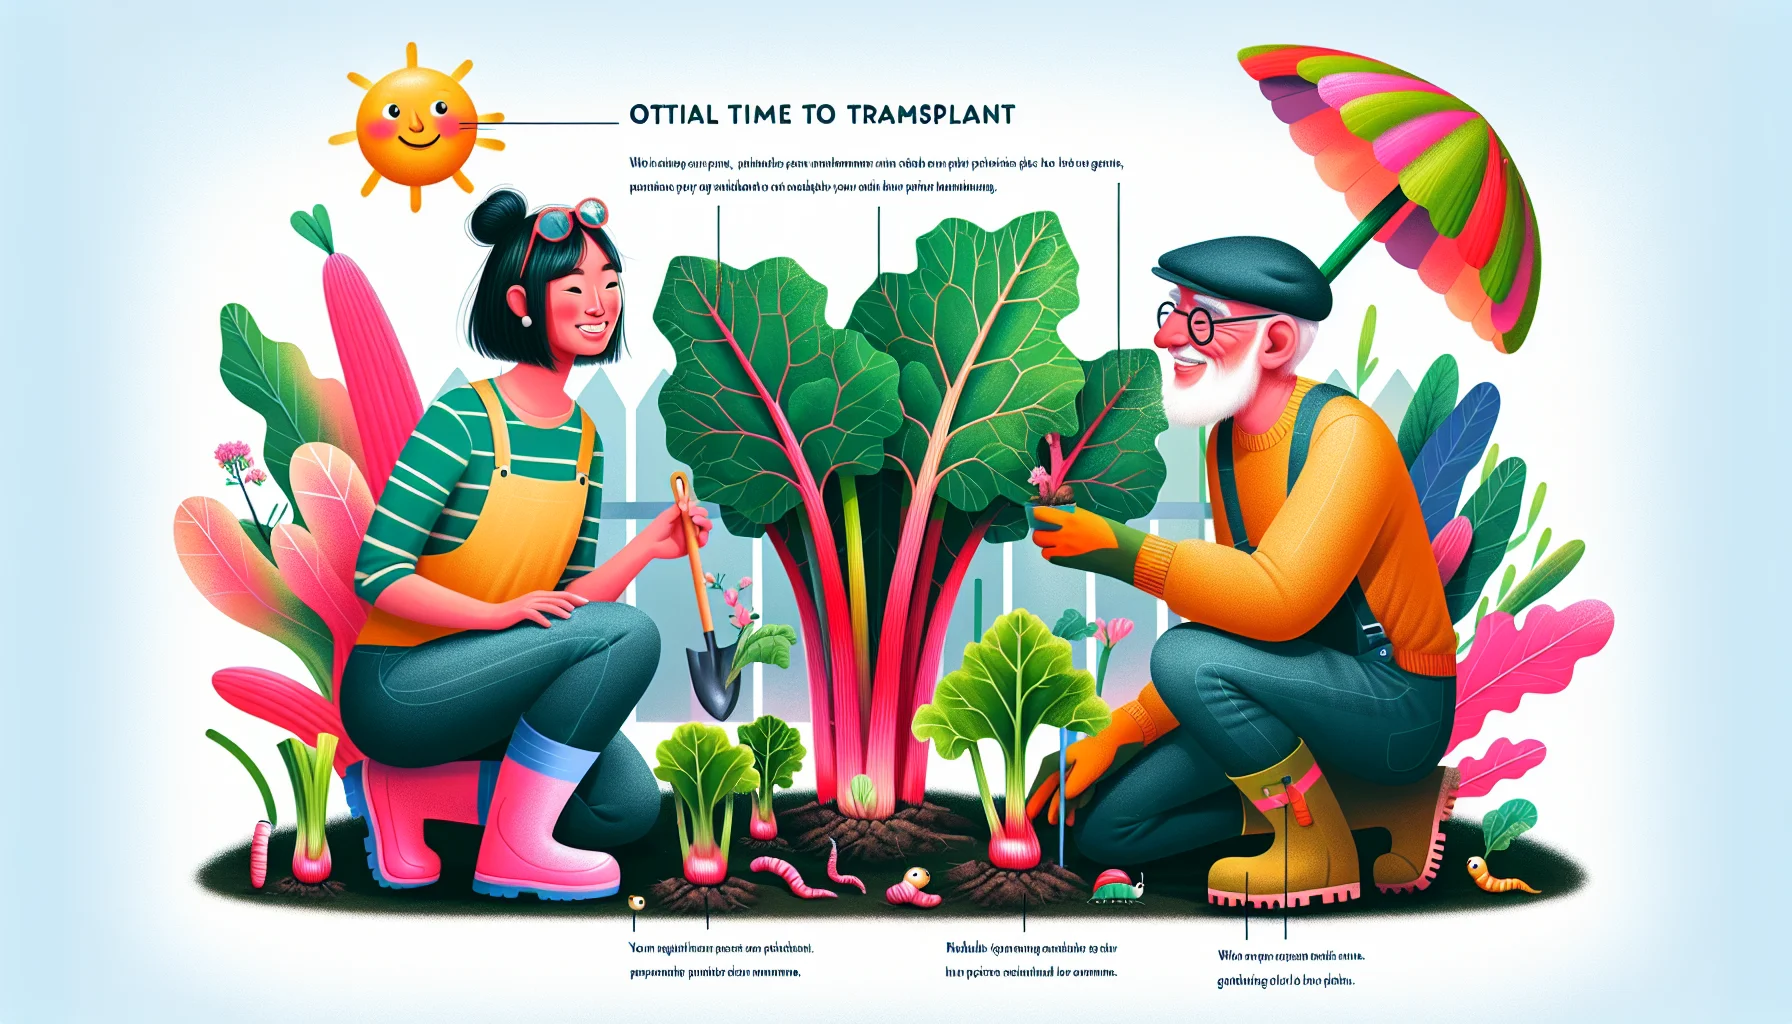 Present a whimsical, realistic scenario that illustrates the optimal time to transplant a rhubarb plant. Show two people engaging in the activity, a young South Asian woman with a bright, genuine smile and a grizzled but cheerful elderly Caucasian man, both wearing quirky, brightly colored gardening gear. Emphasize colorful rhubarb plants in various stages of growth. Include small visual elements that add humor without distracting from the central activity, such as a sun wearing sunglasses in the sky, earthworms with tiny hats, or a mischievous squirrel with an upside-down rhubarb leaf as an umbrella. Setting ought to be a lush backyard garden brimming with life to encourage the joys of gardening.